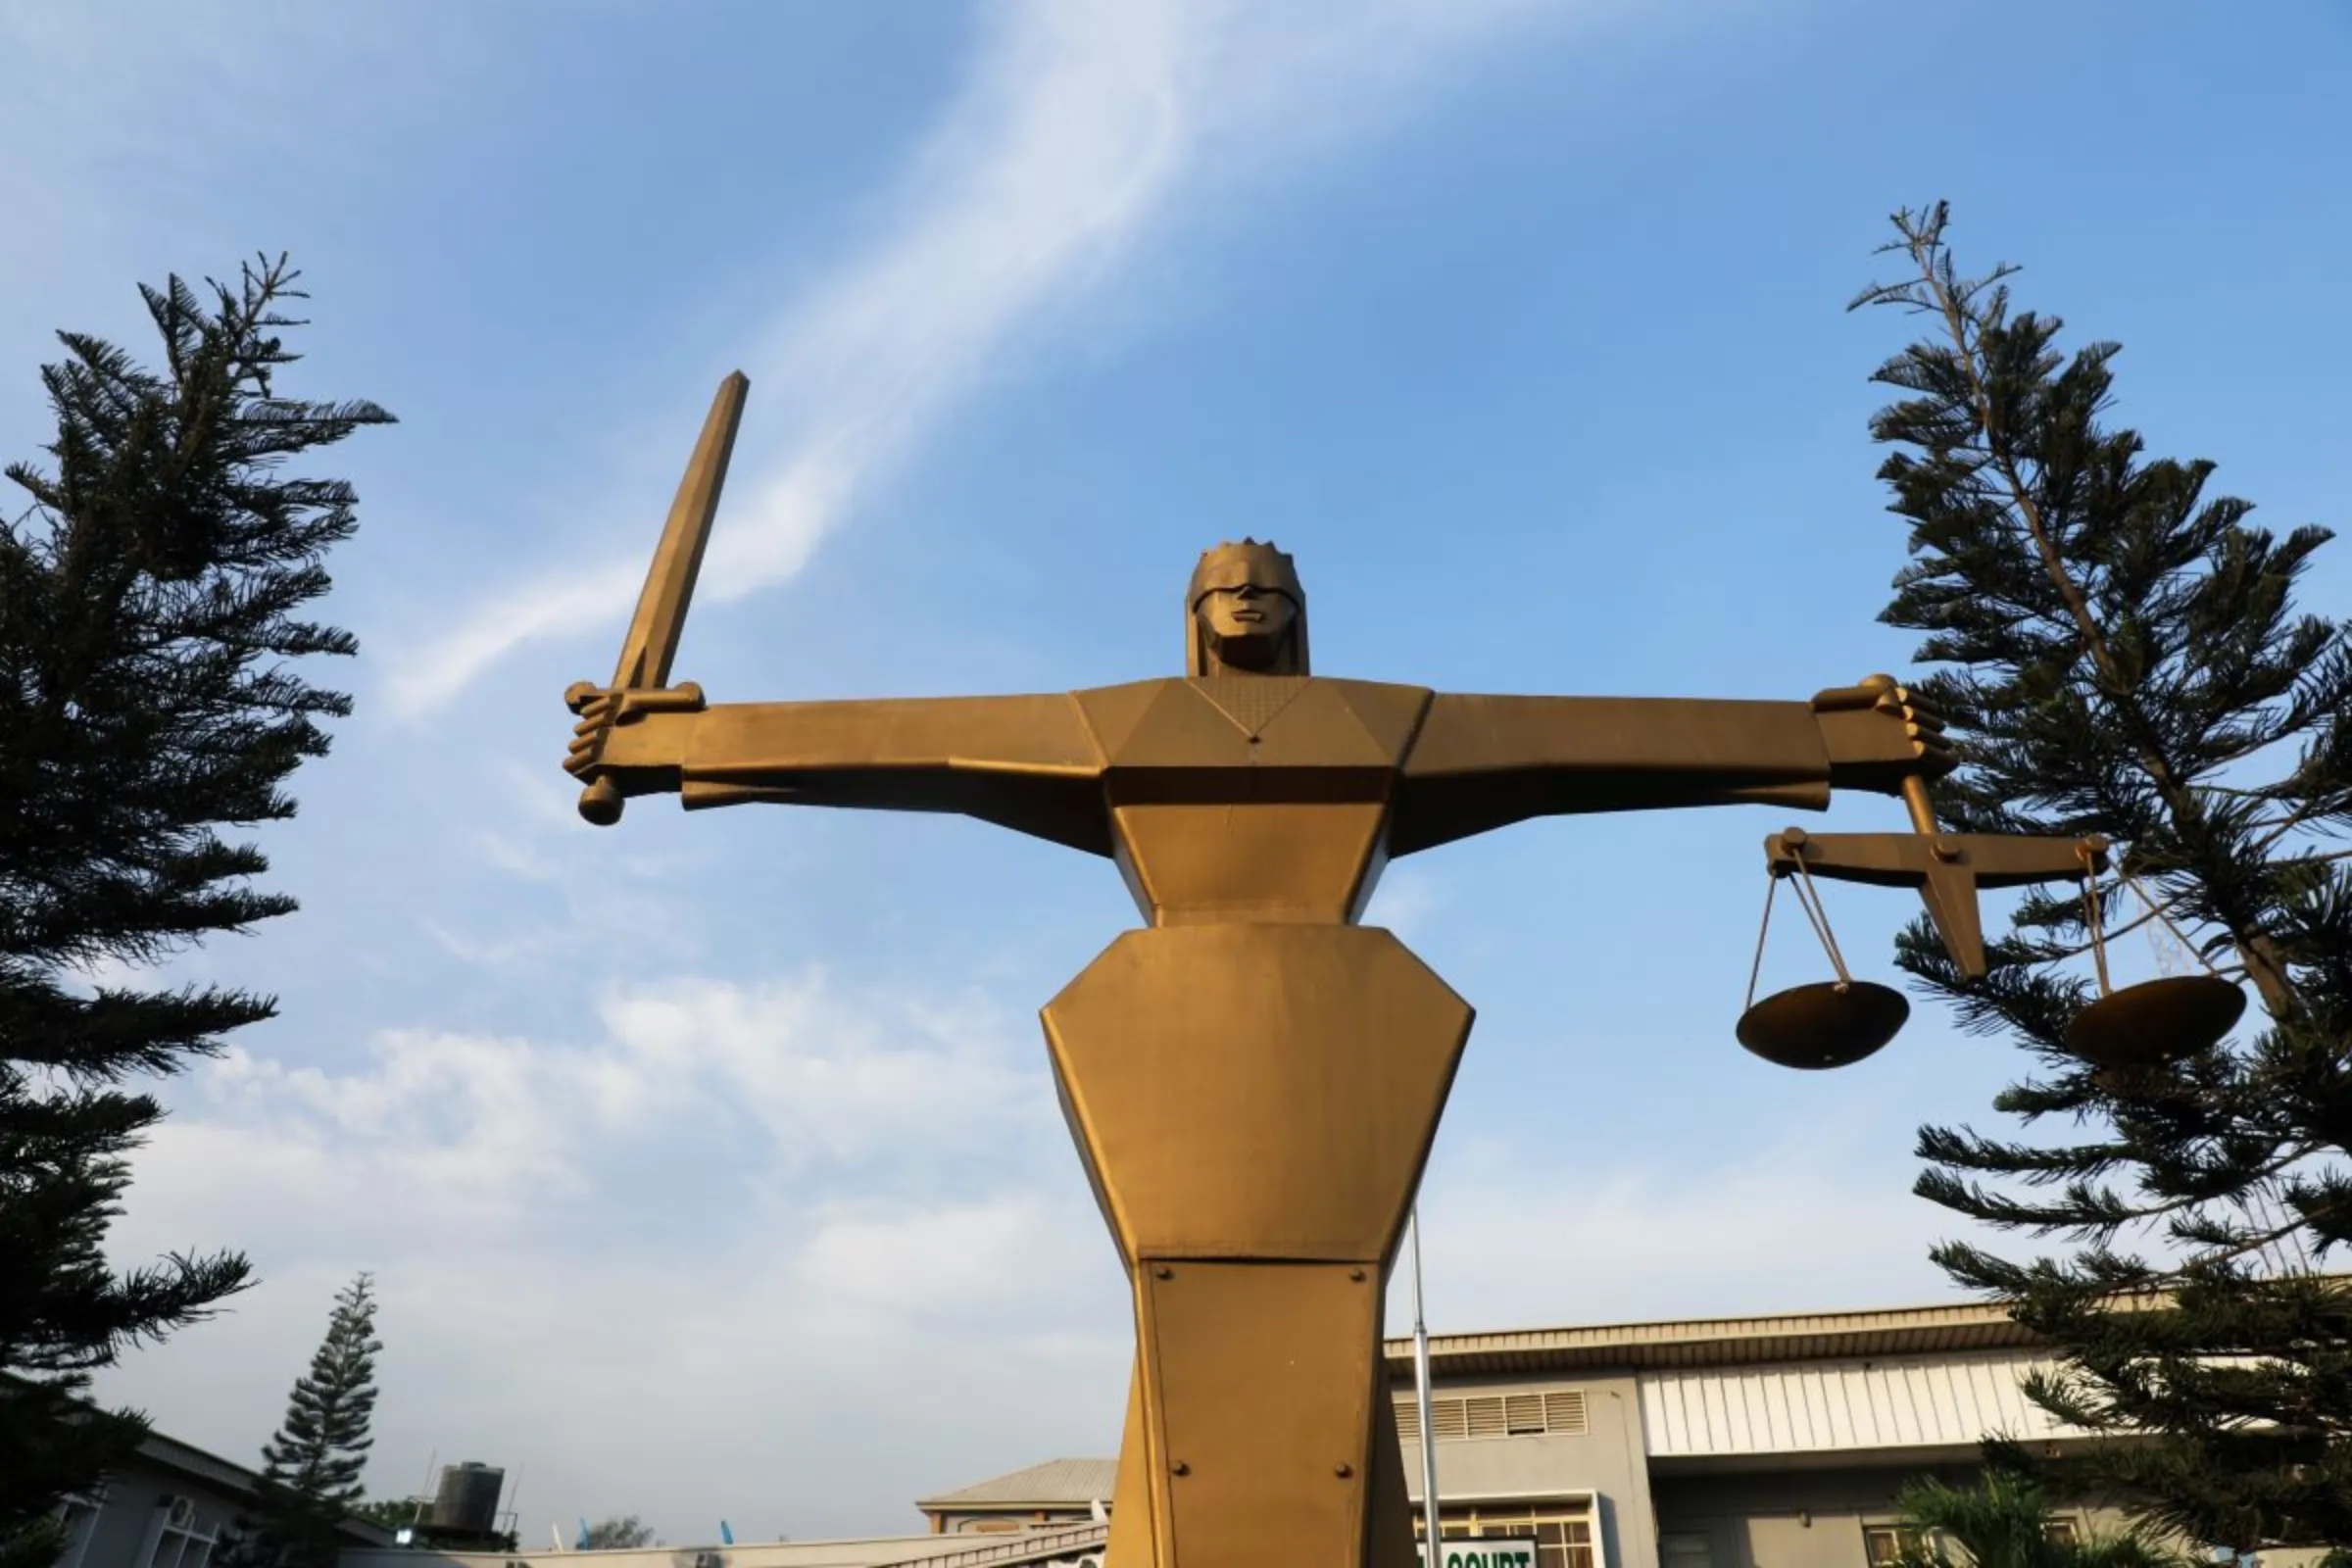 The Statue of Lady Justice is pictured at the premises of the Federal High Court in Lagos, Nigeria, March 3, 2020. REUTERS/Temilade Adelaja